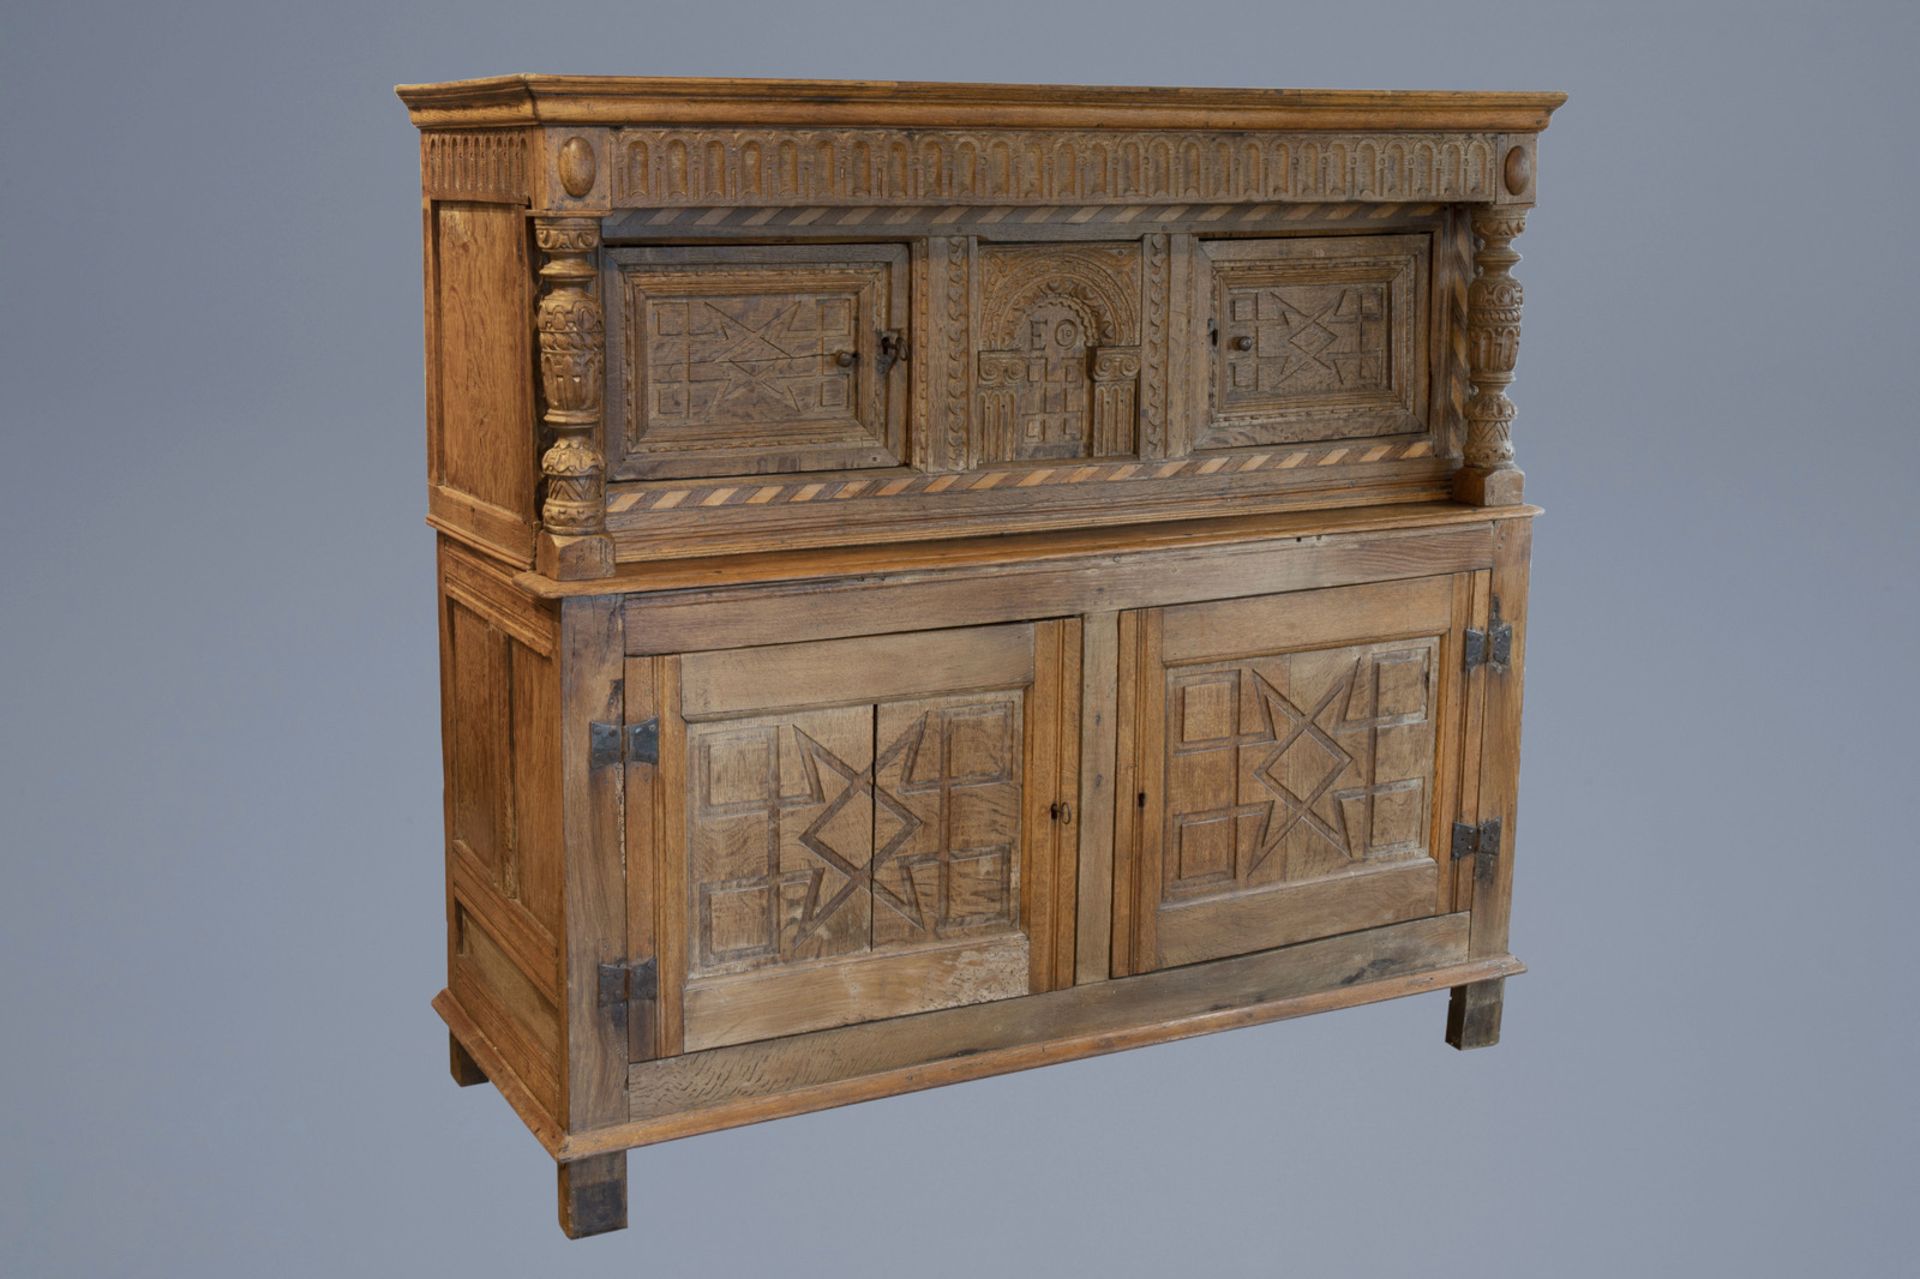 An English or Flemish wooden four-door court cupboard with geometric pattern, 17th/18th C.